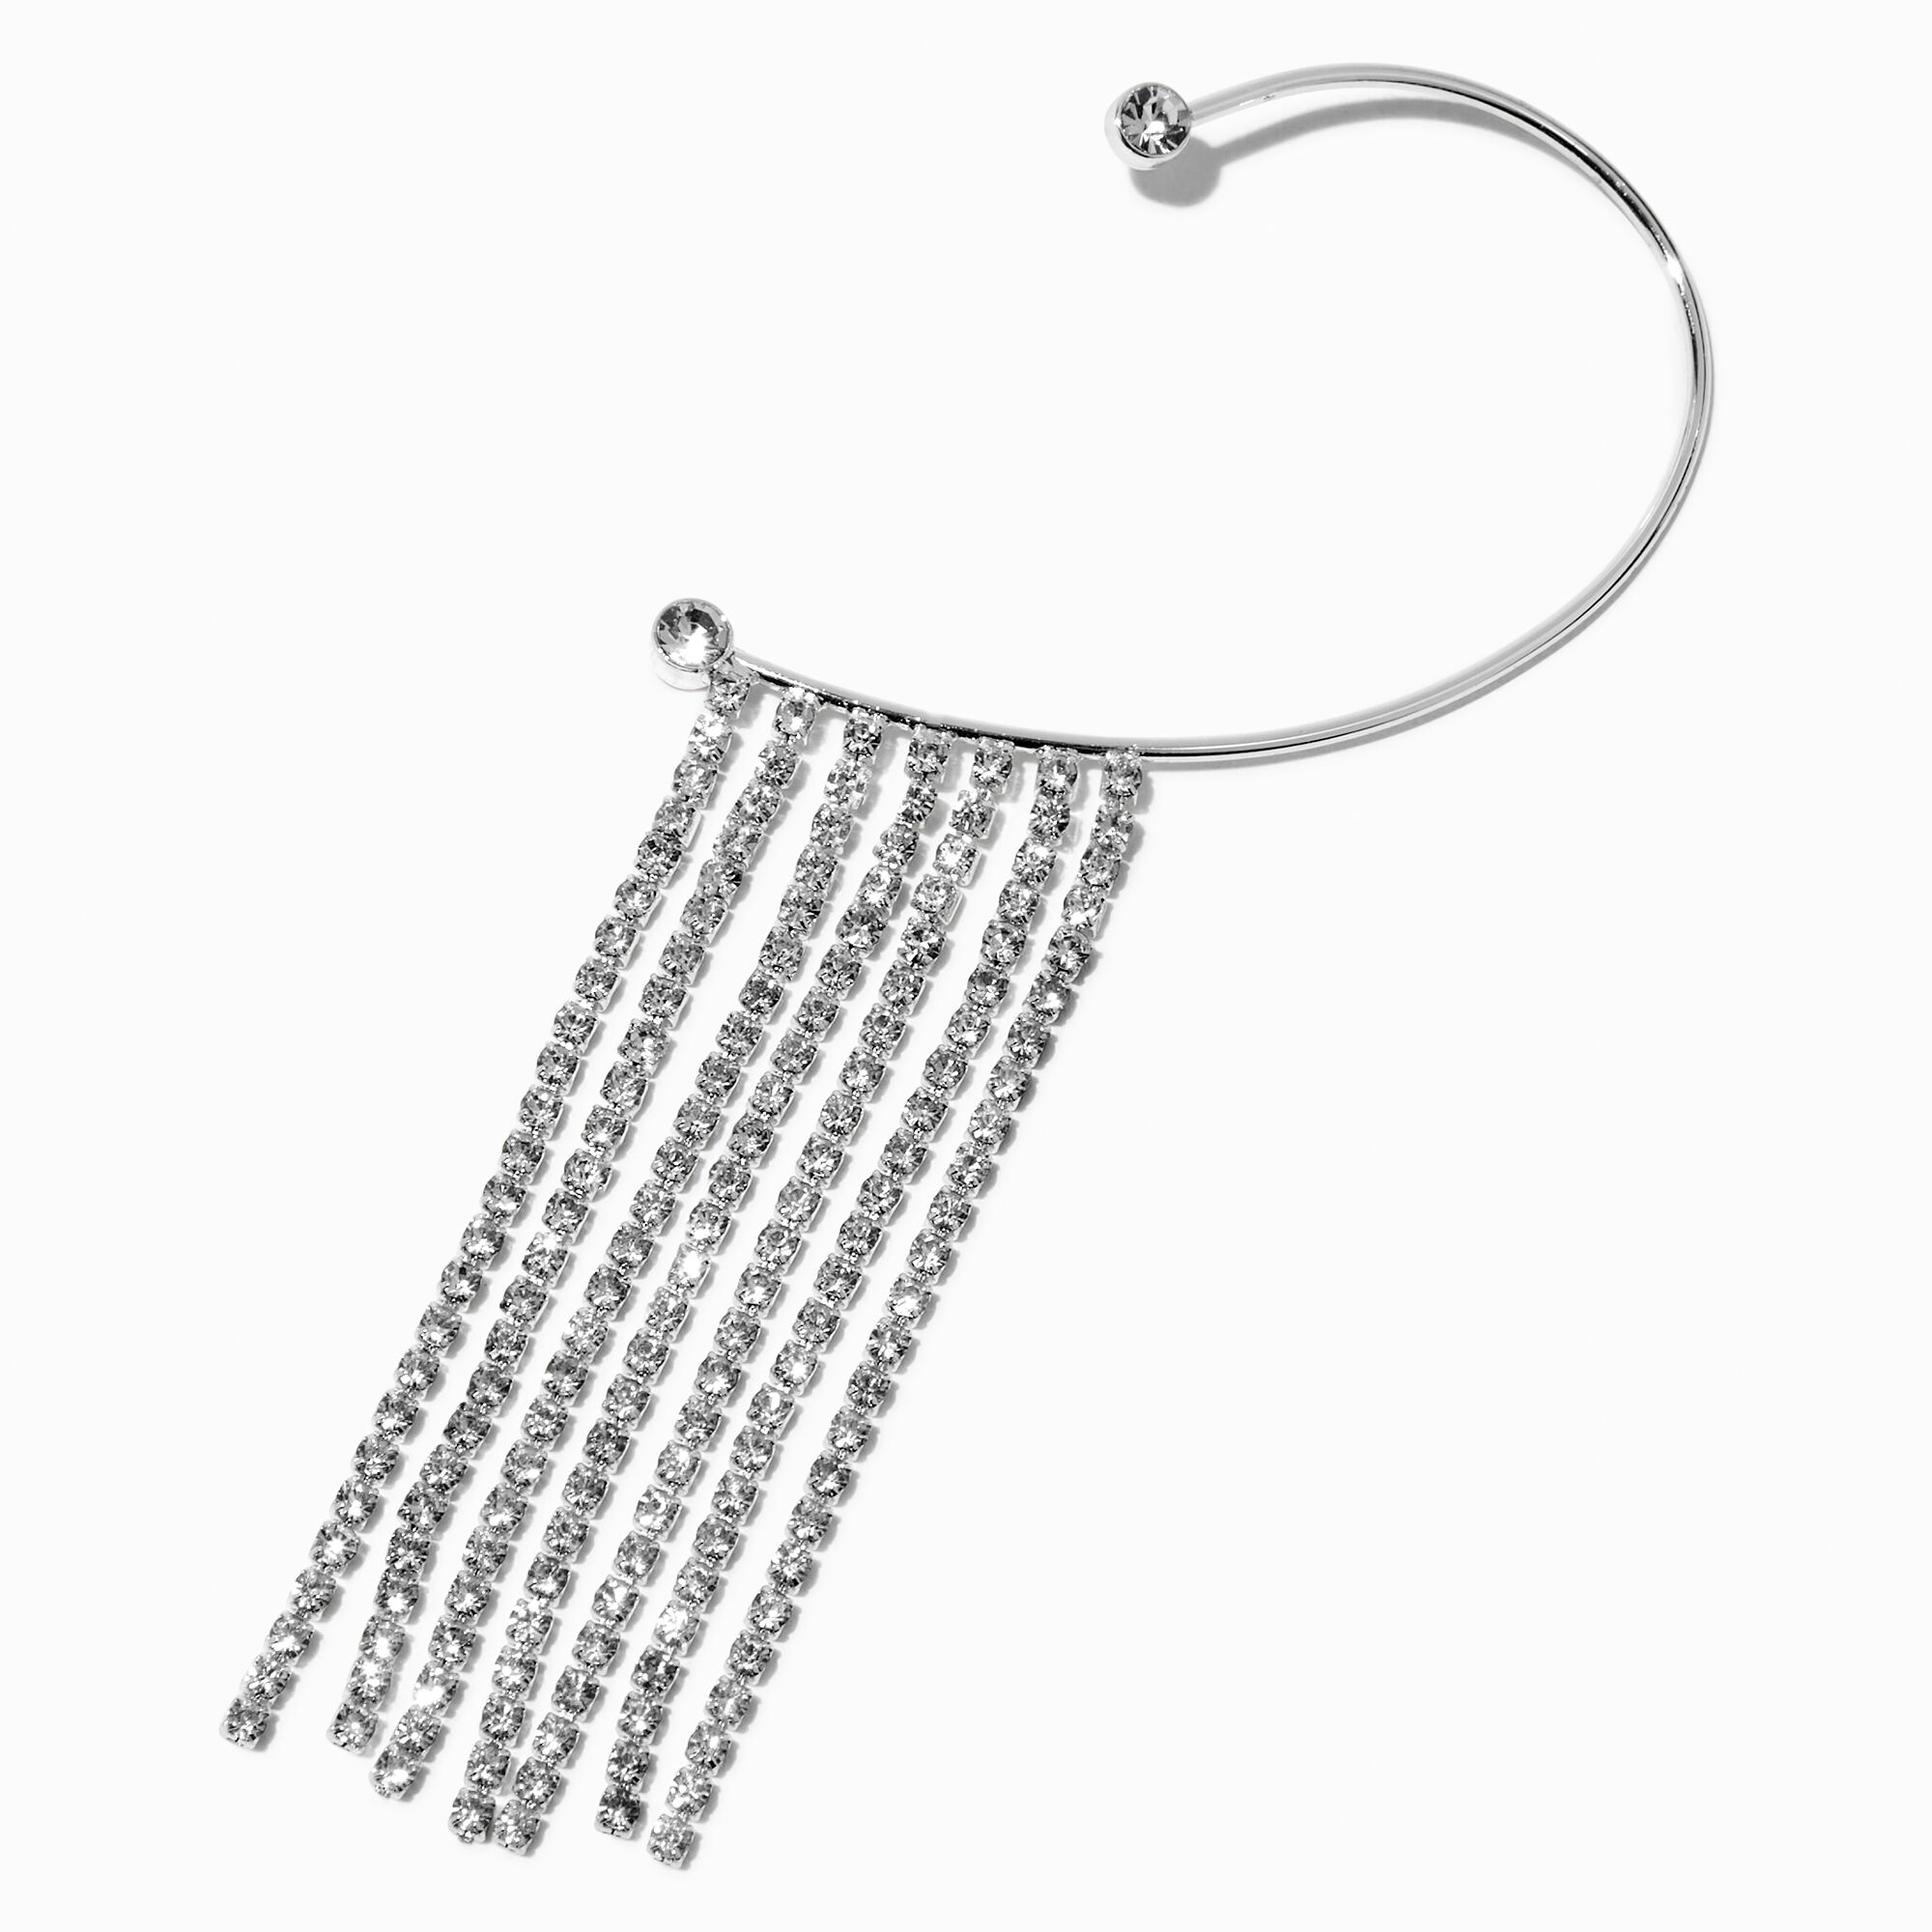 View Claires Rhinestone Fringe Linear Drop Hanging Ear Cuff Silver information